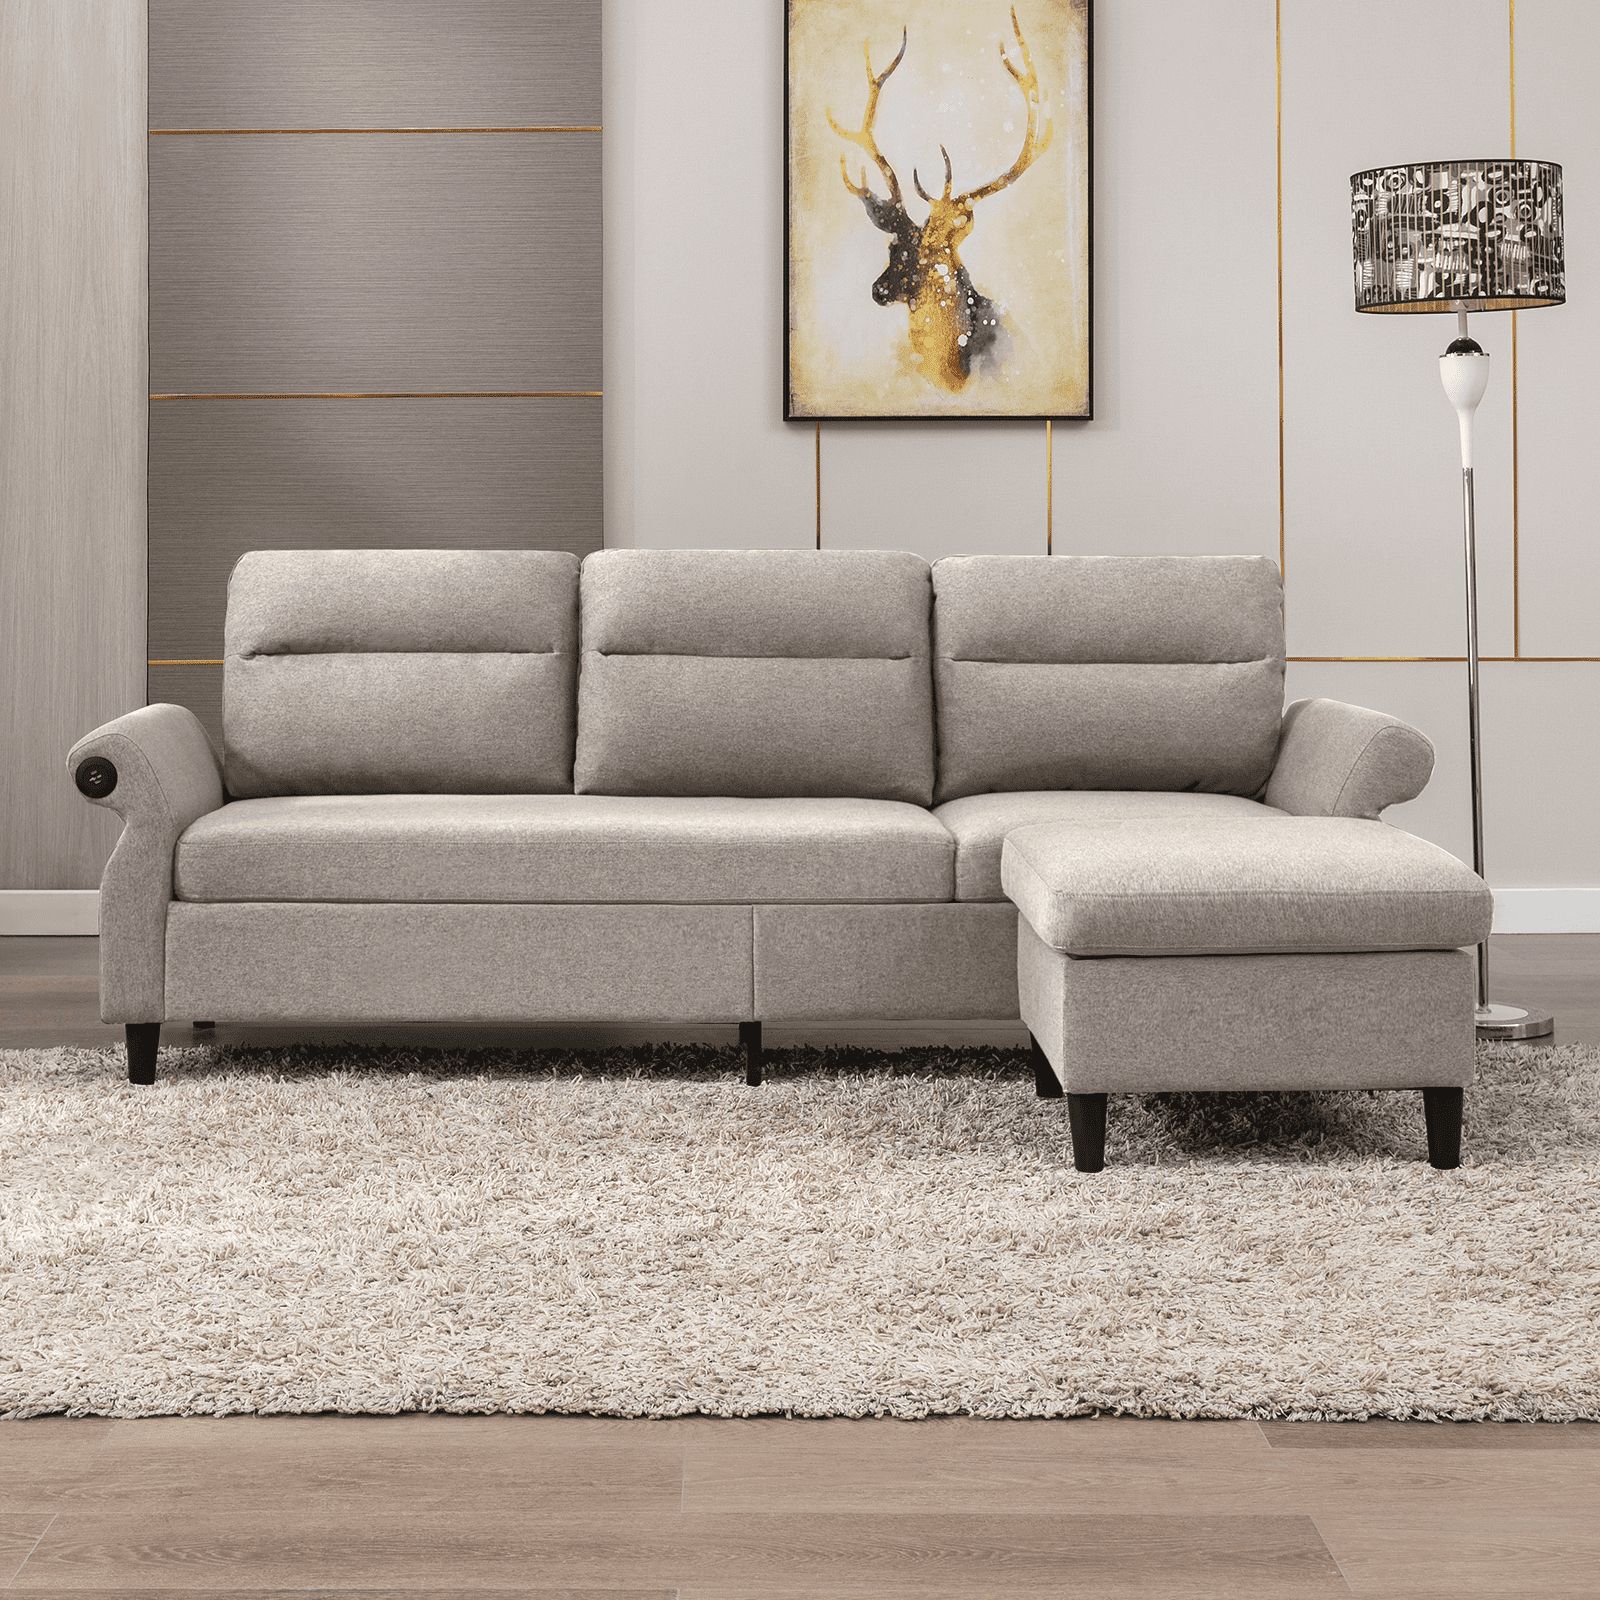 Mjkone Modern 88" W Convertible Sectional Sofa Couch With 2 Usb Ports And  Adjustable Armres,3 Seat L Shape Sofa Couch With,Ottoman For Living  Room,Apartment , Linen Fabric,Light Grey – Walmart Pertaining To 3 Seat L Shape Sofa Couches With 2 Usb Ports (Photo 2 of 15)